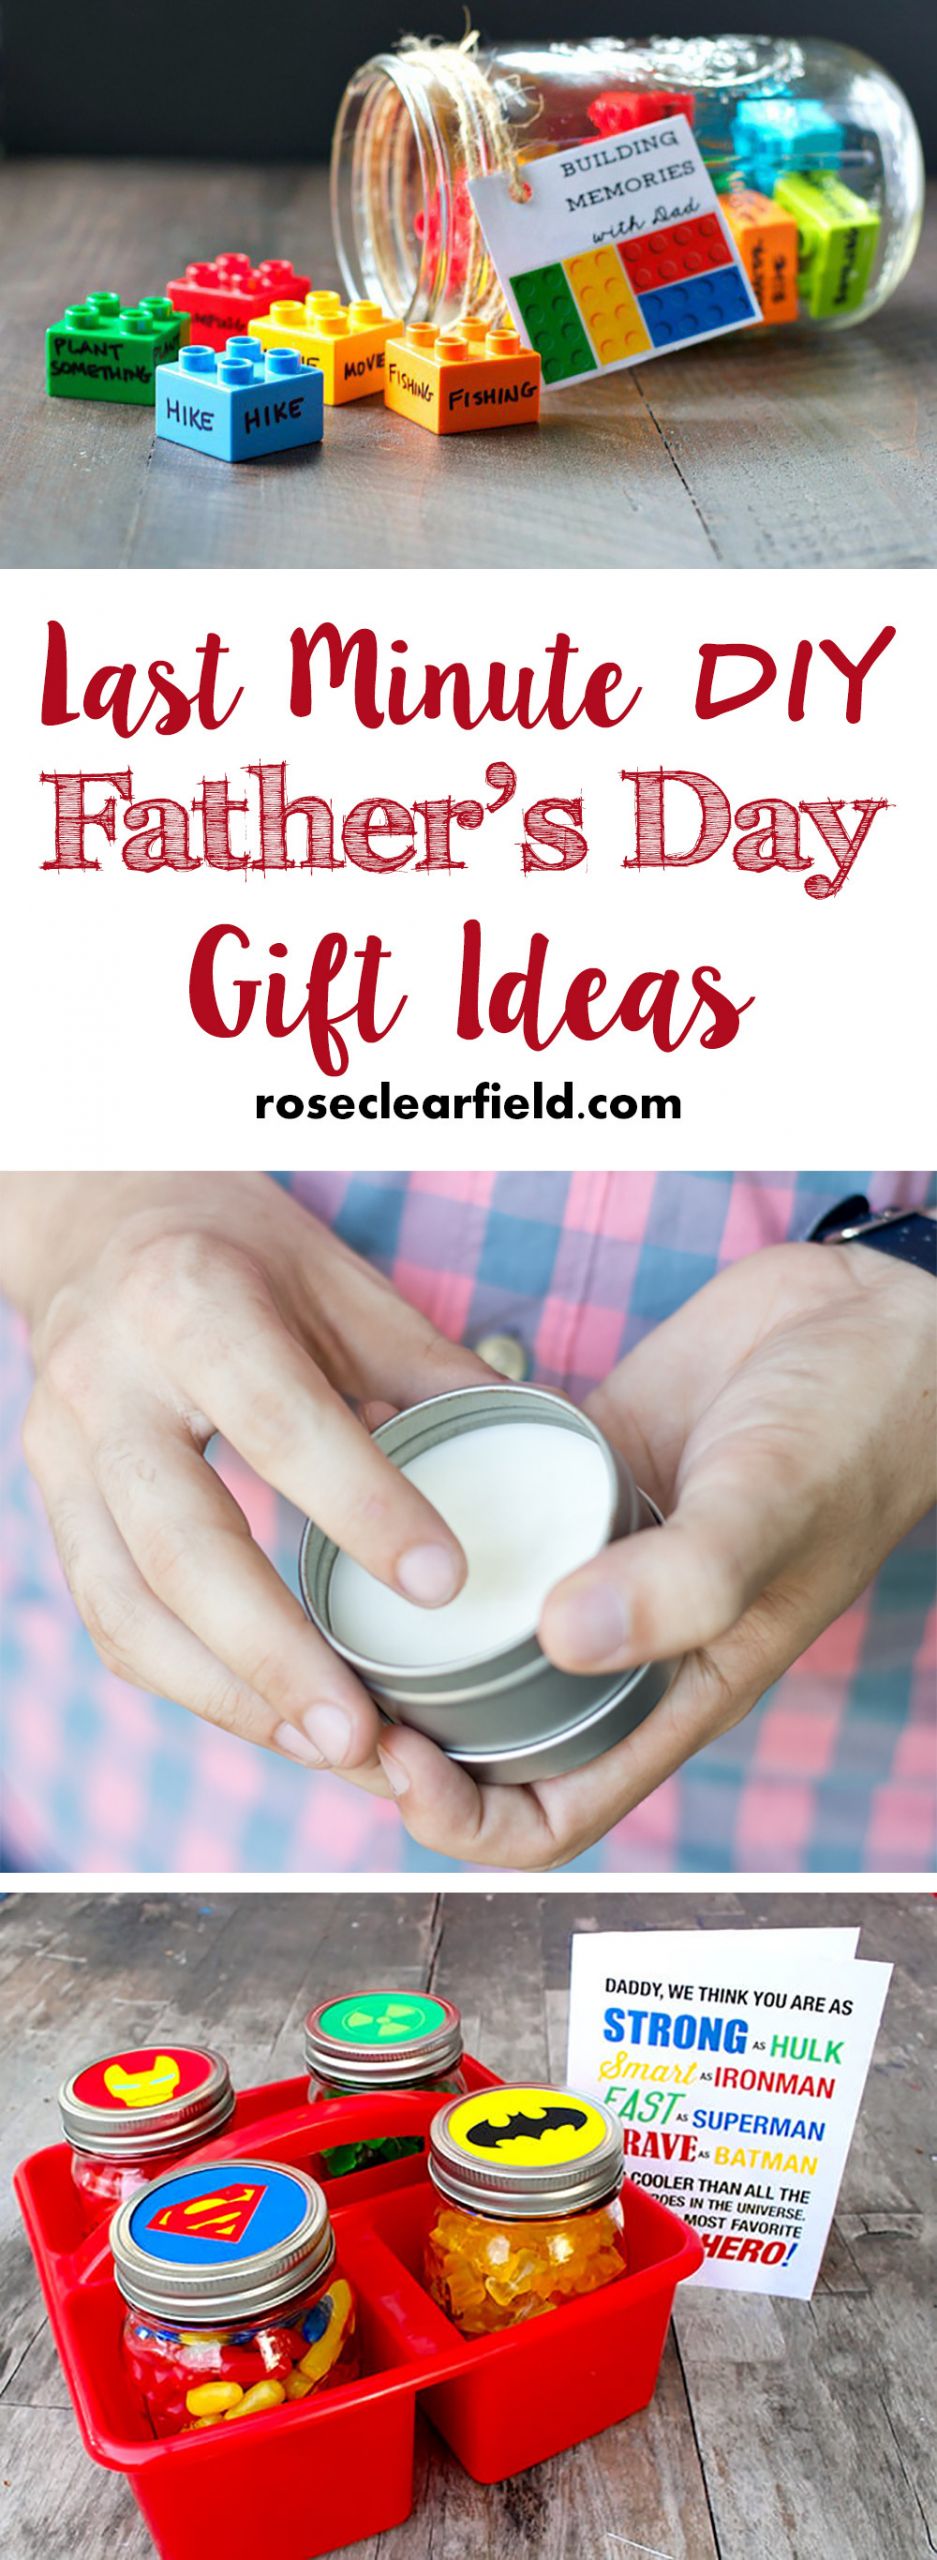 Quick DIY Father'S Day Gifts
 Last Minute DIY Father s Day Gift Ideas • Rose Clearfield